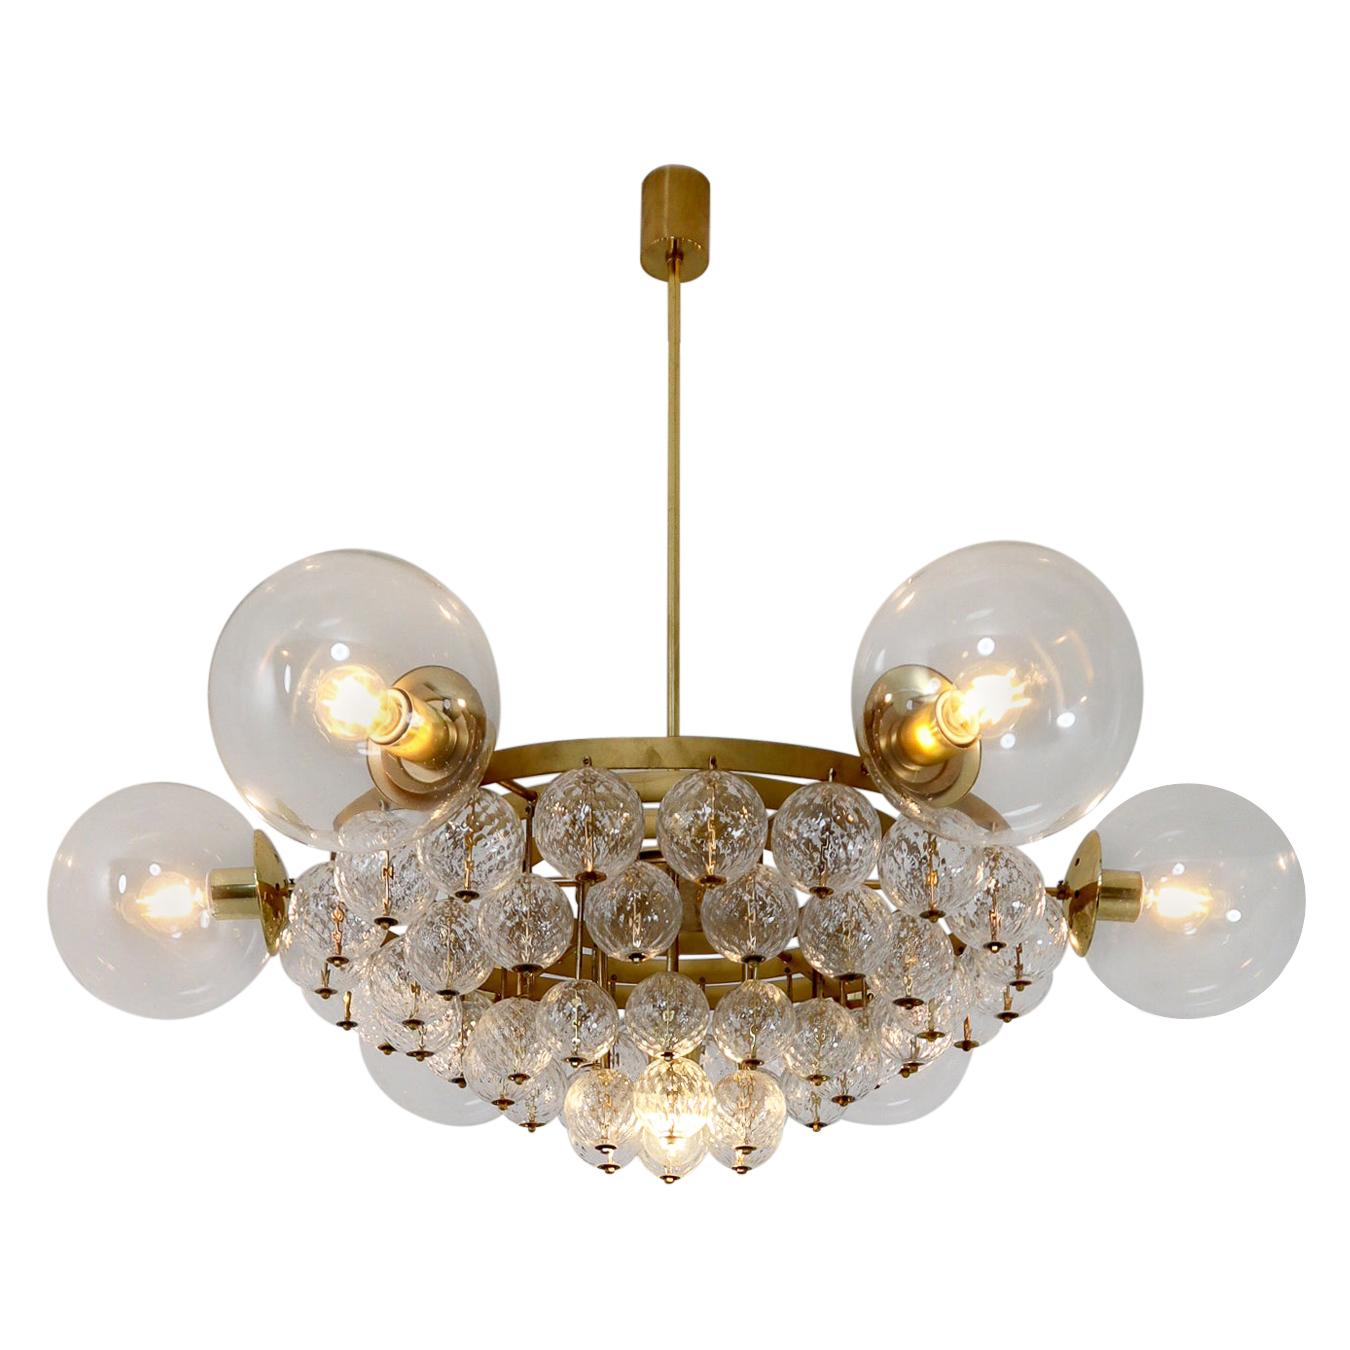 Large Hotel Chandeliers with Brass Fixture and Structured Glass Globes For Sale